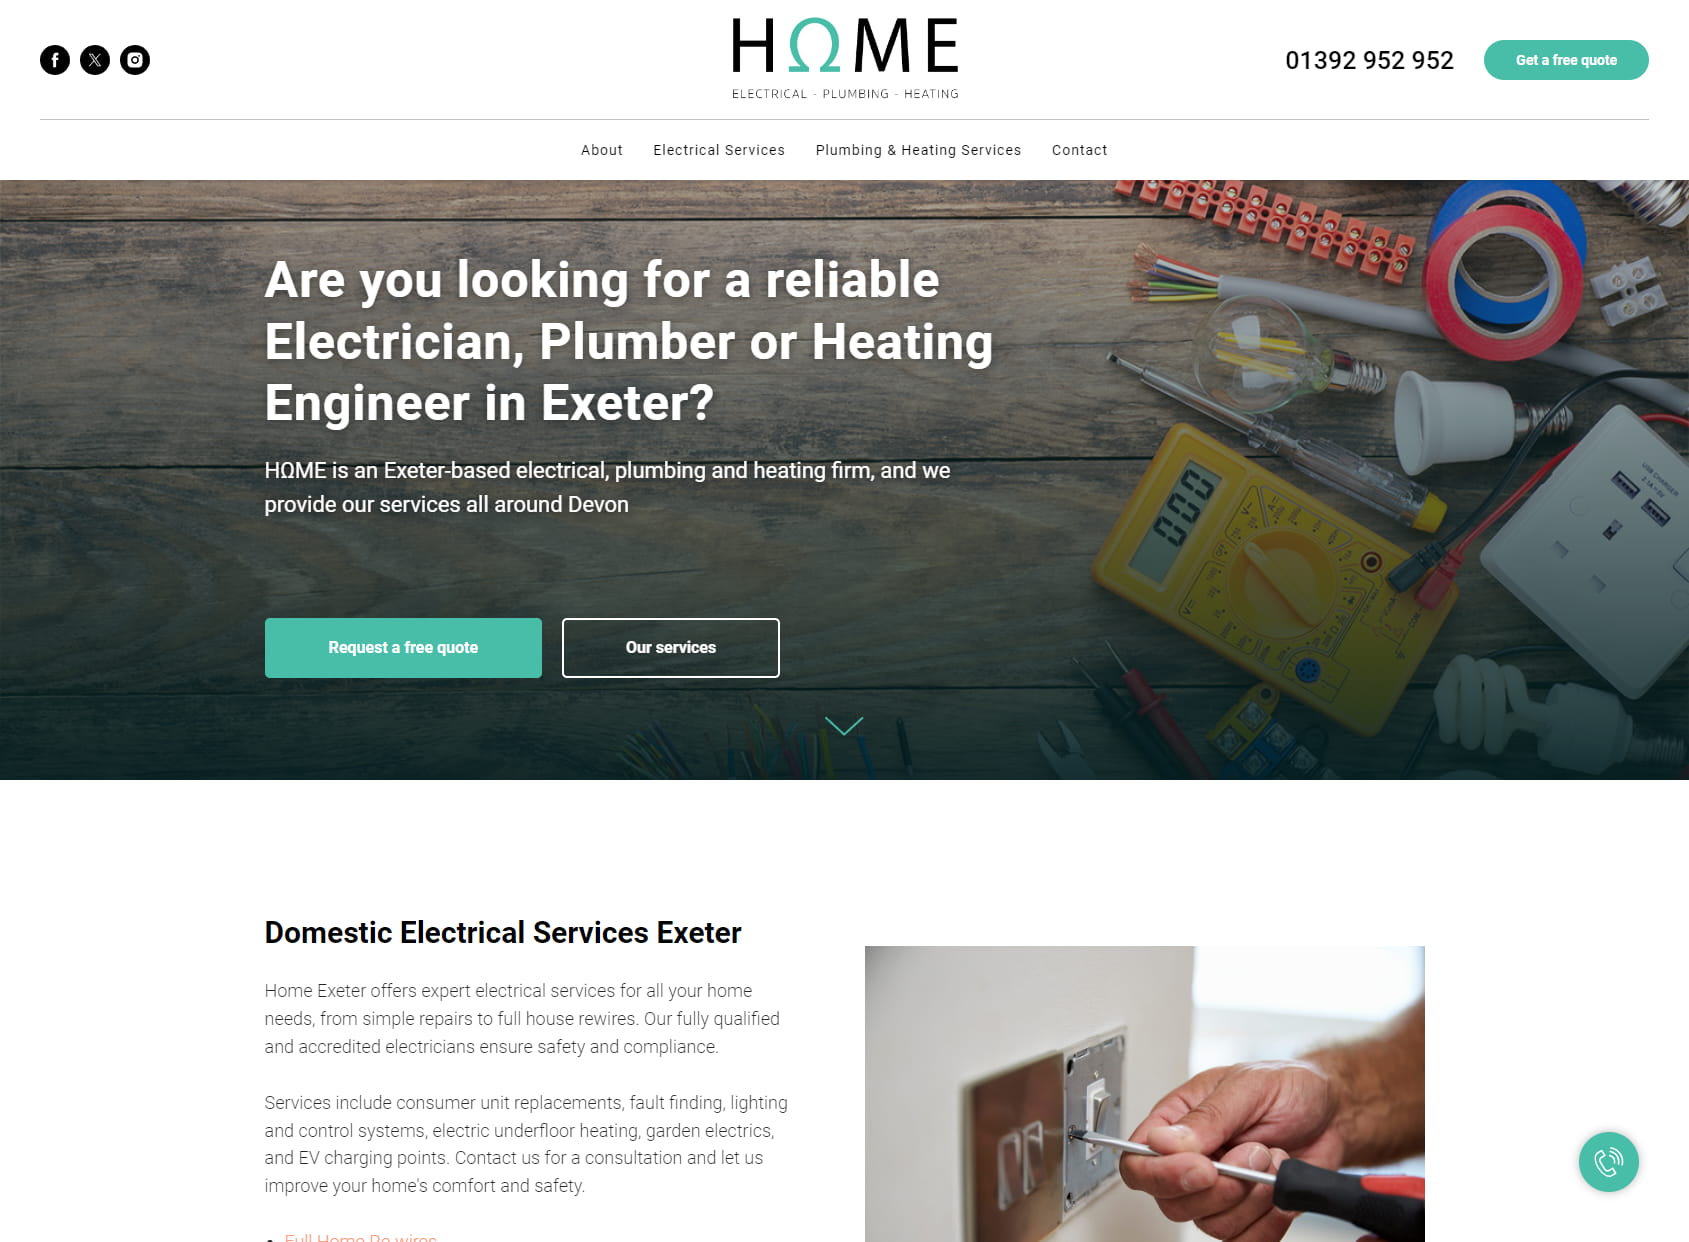 Home Exeter Limited